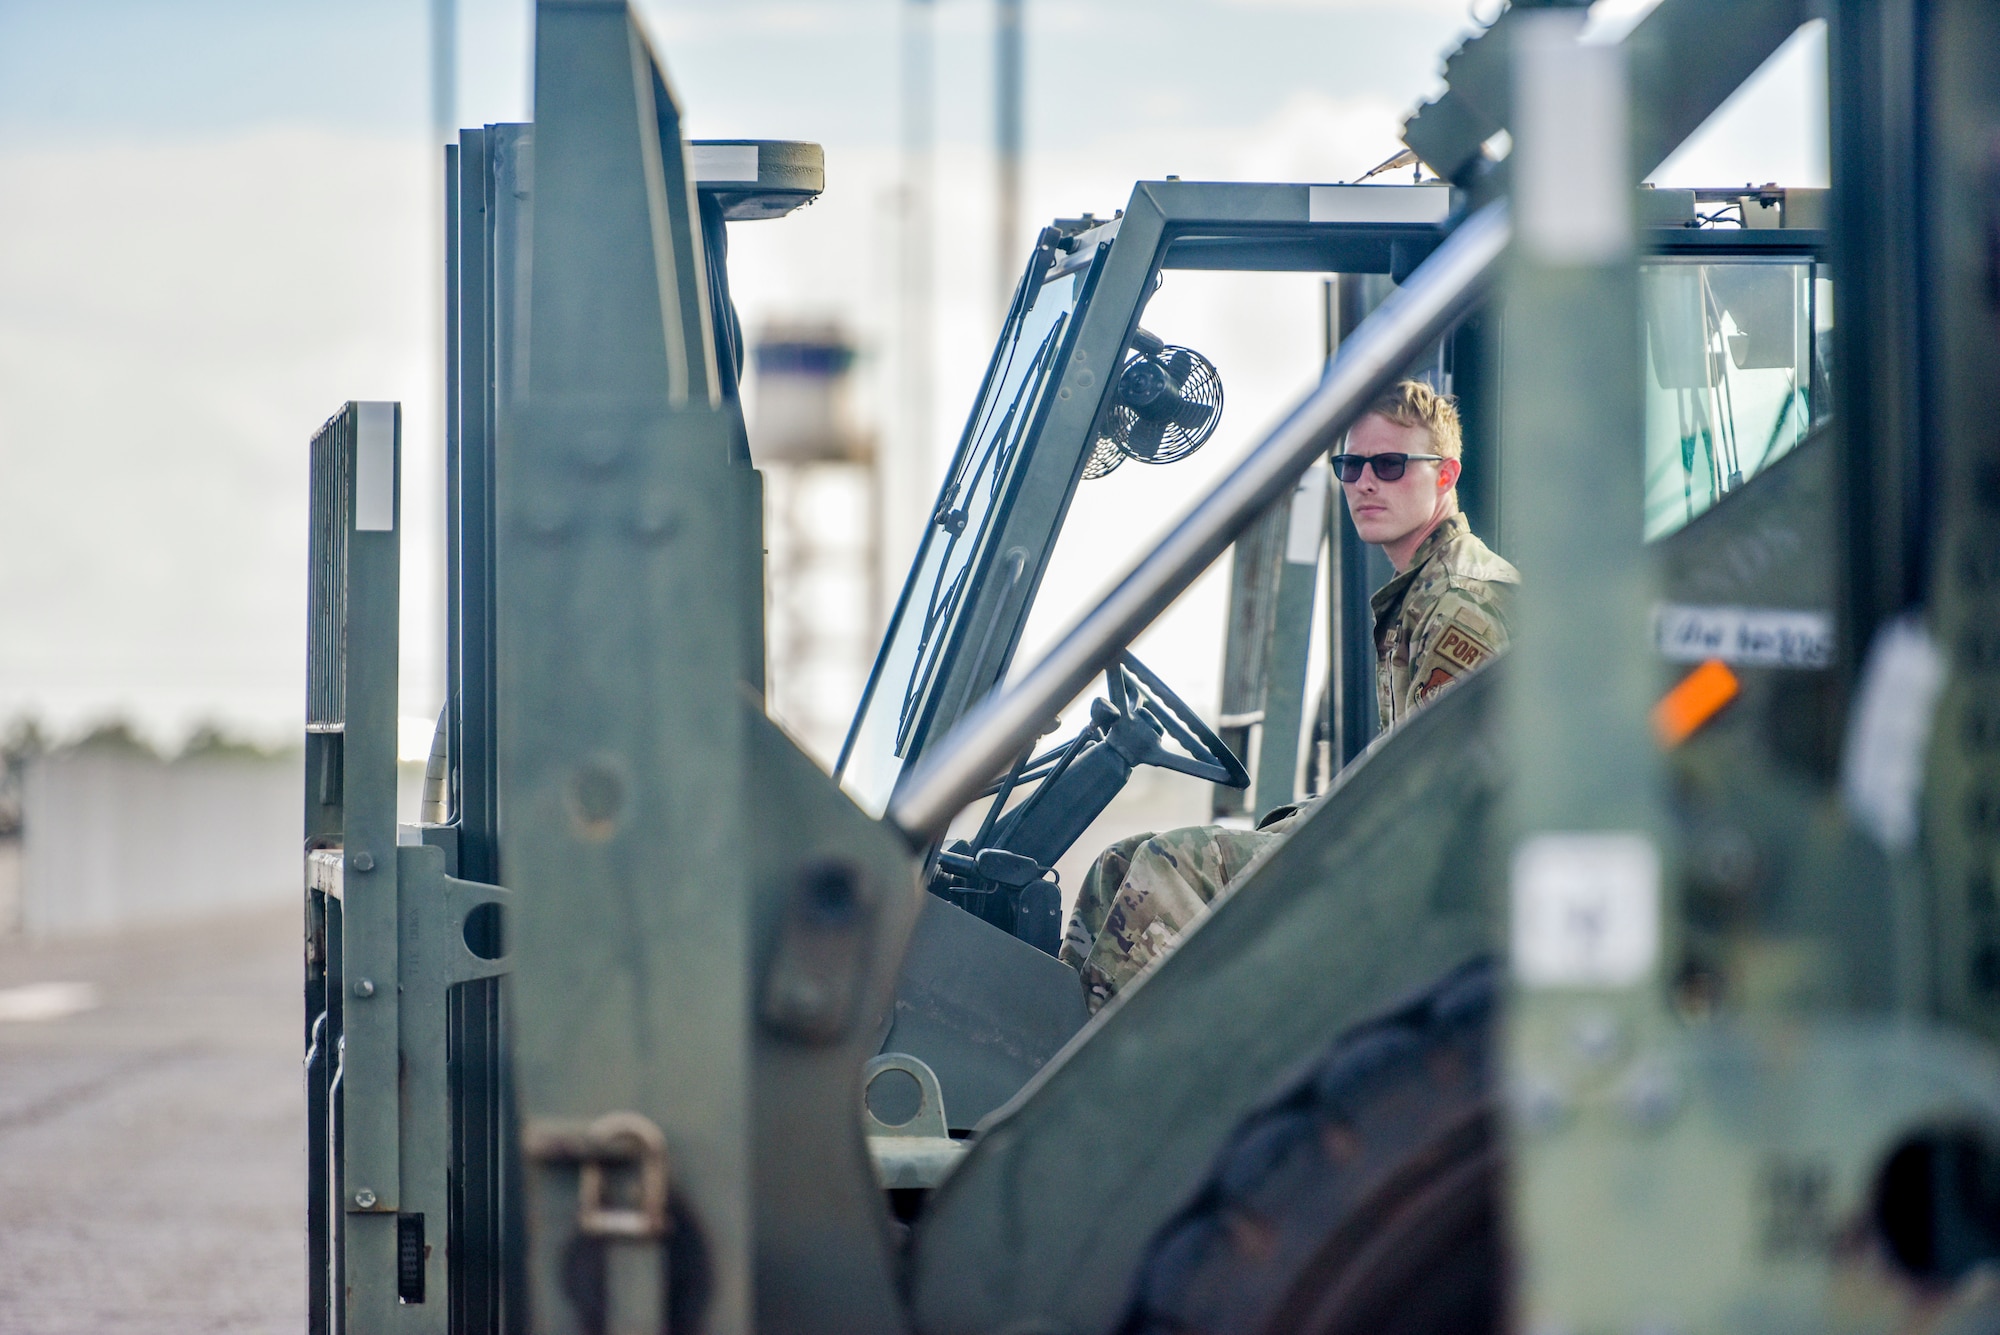 U.S. Air Force Staff Sgt’s. Austin Chambers and Kevin Mcgauley, 647th Logistics Readiness Squadron members discuss forklift procedures within the cargo deployment function yard at Joint Base Pearl Harbor-Hickam, Hawaii, Dec. 22, 2021. 647th LRS received a total of 15 pallets of charcoal filters weighing 75 tons from a C-5 Super Galaxy in support of the water recovery efforts on Oahu.   (U.S. Air Force photo by Tech. Sgt. Anthony Nelson Jr.)